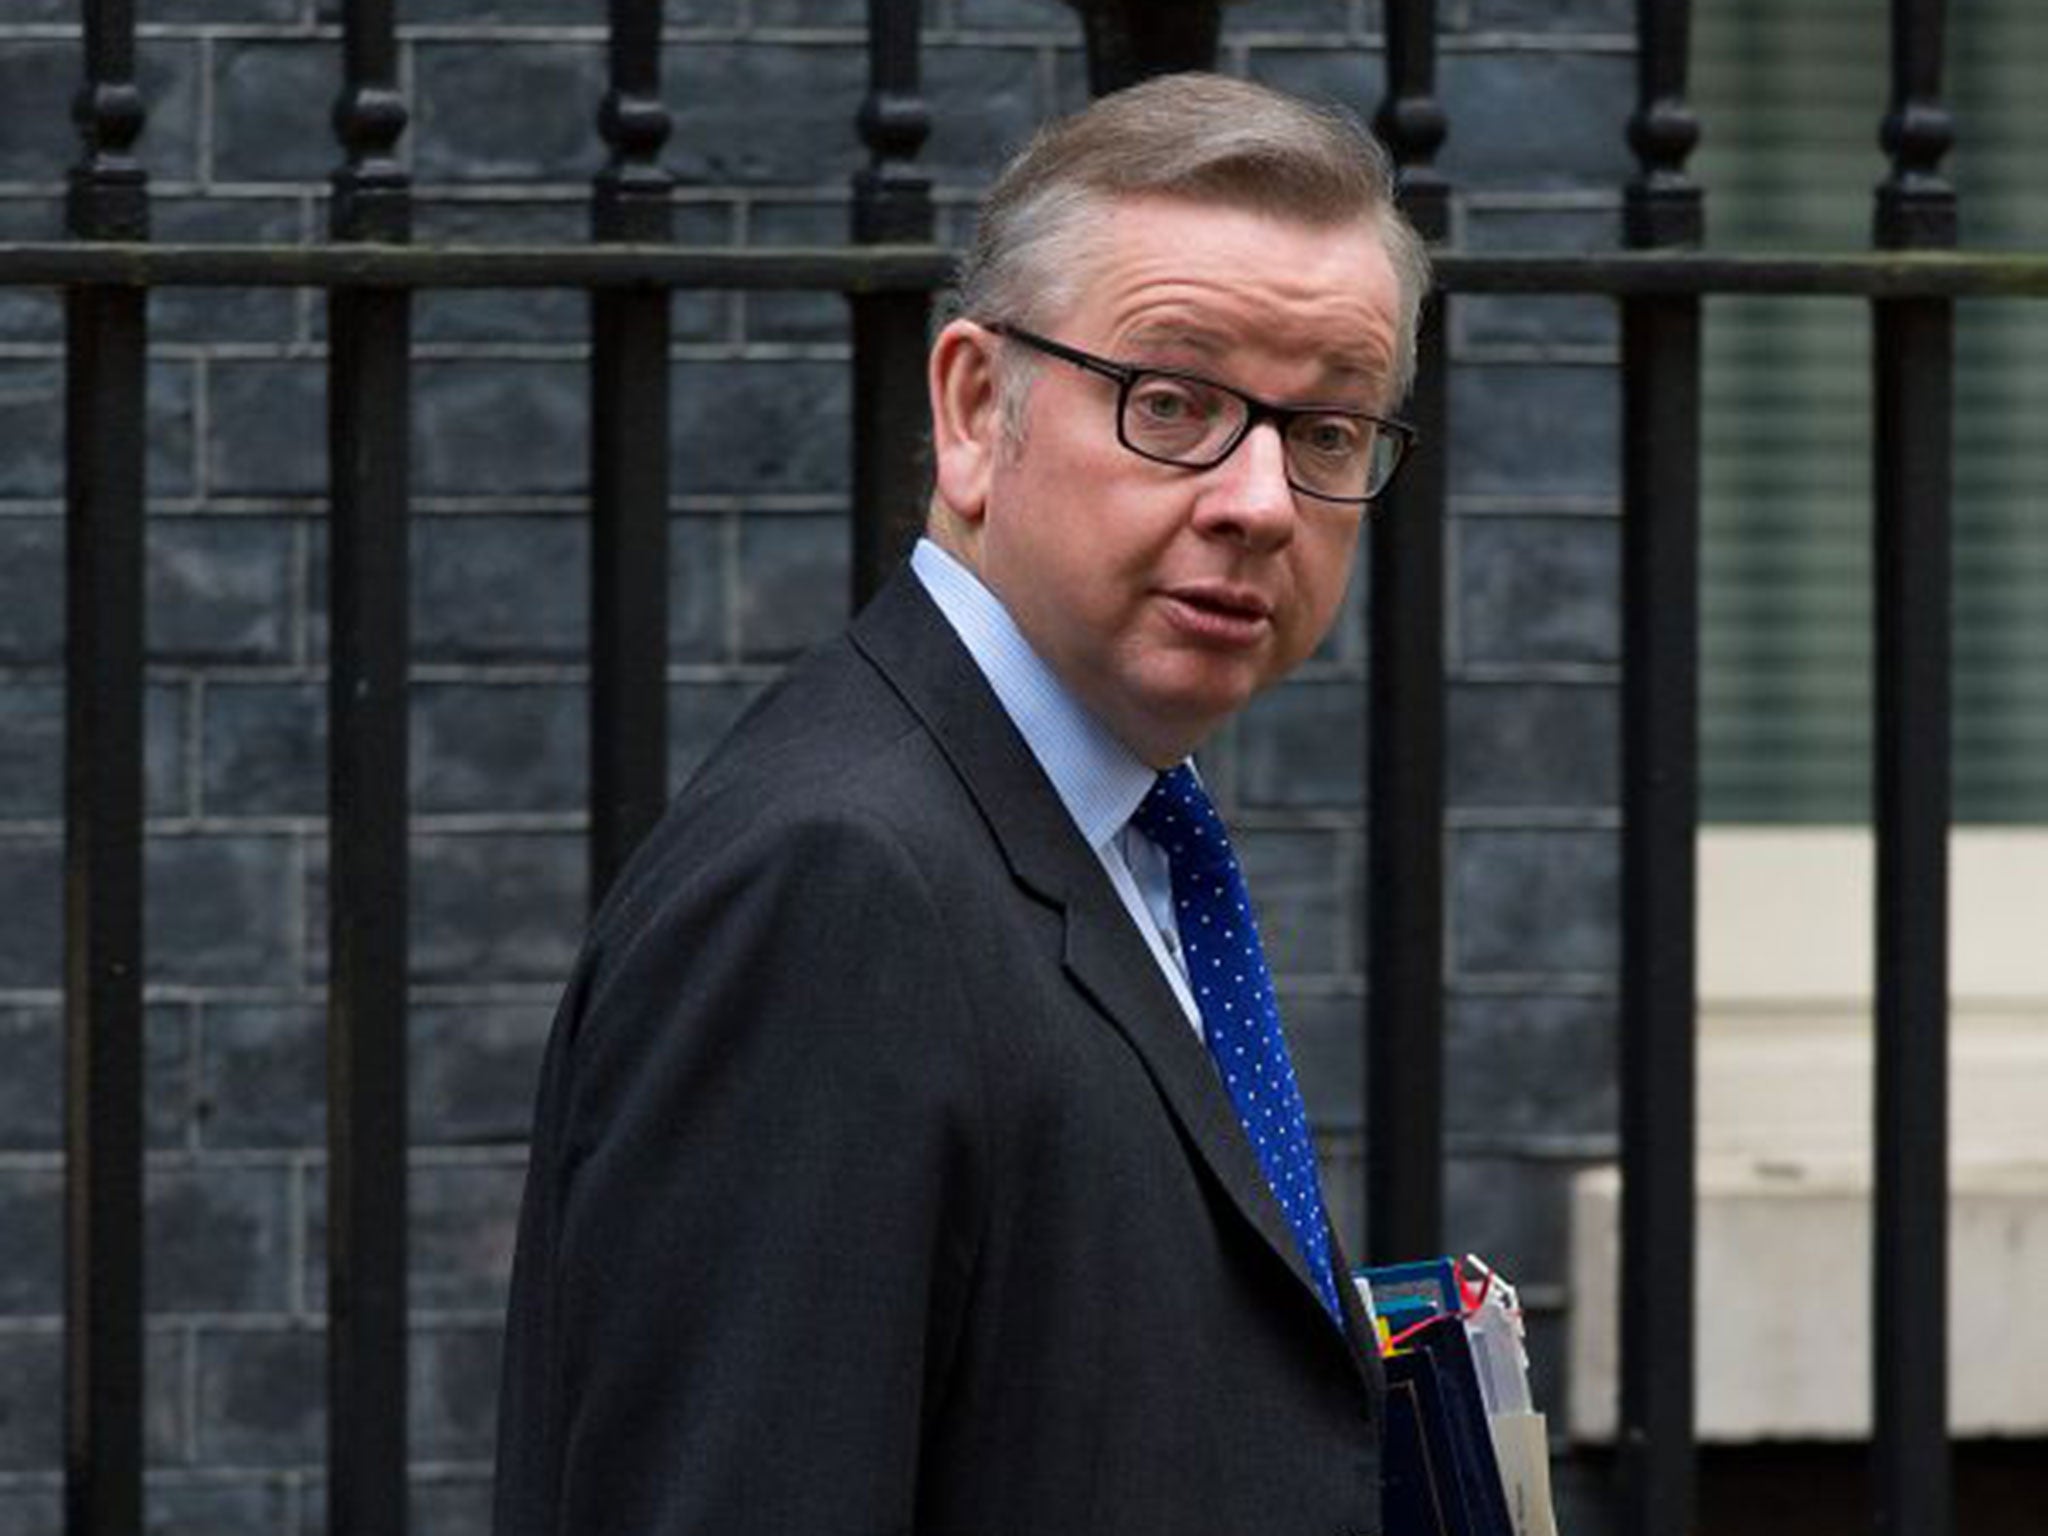 &#13;
Michael Gove cancelled the contract &#13;